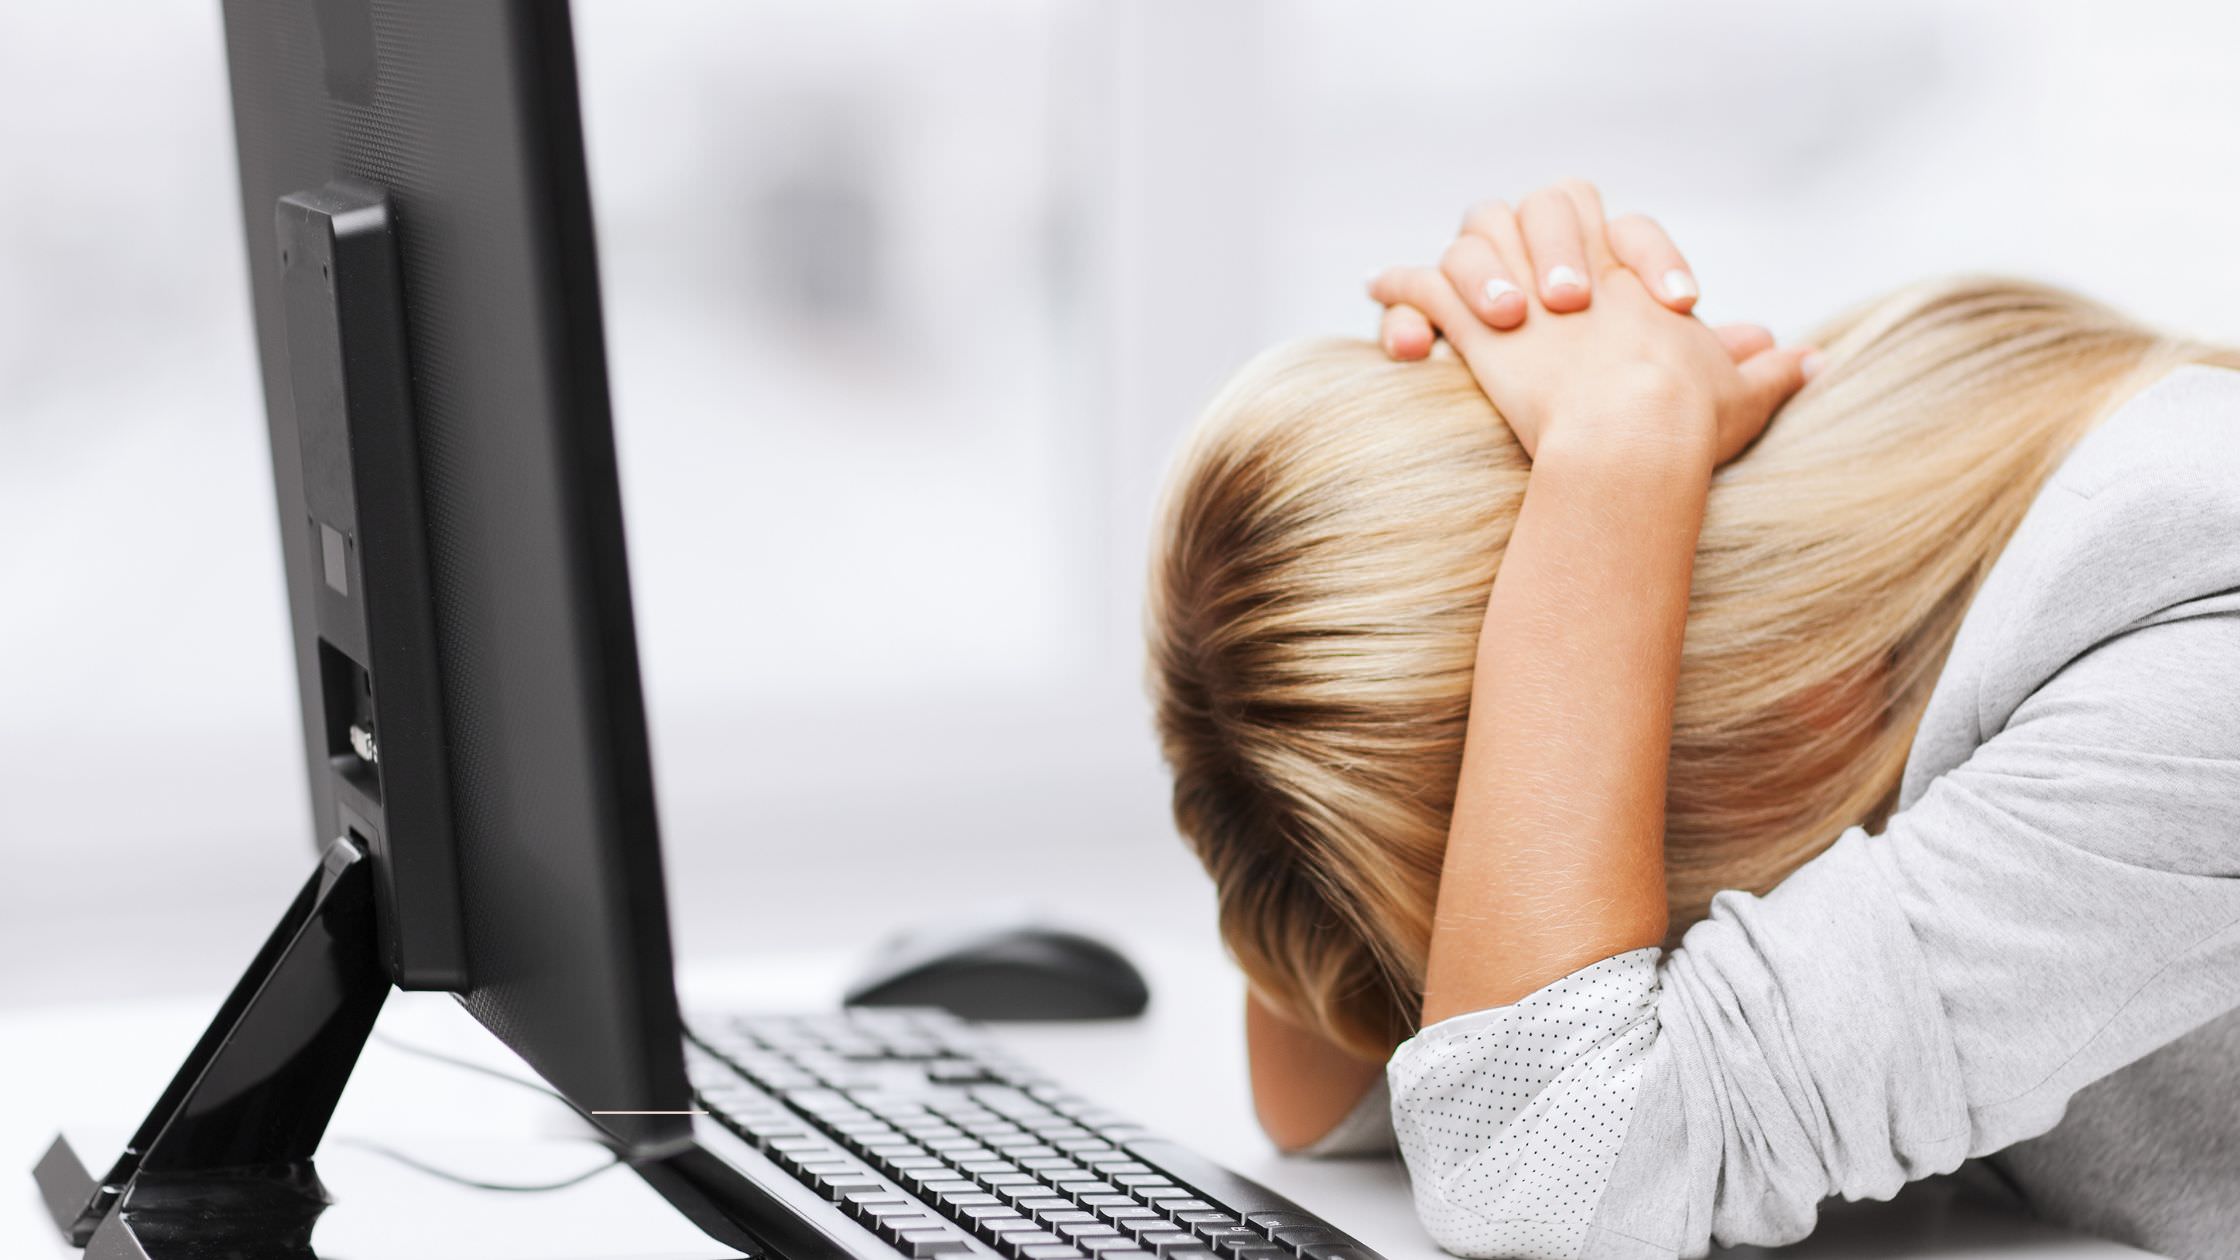 These Symptoms of Stress Could Be Damaging You And Your Business